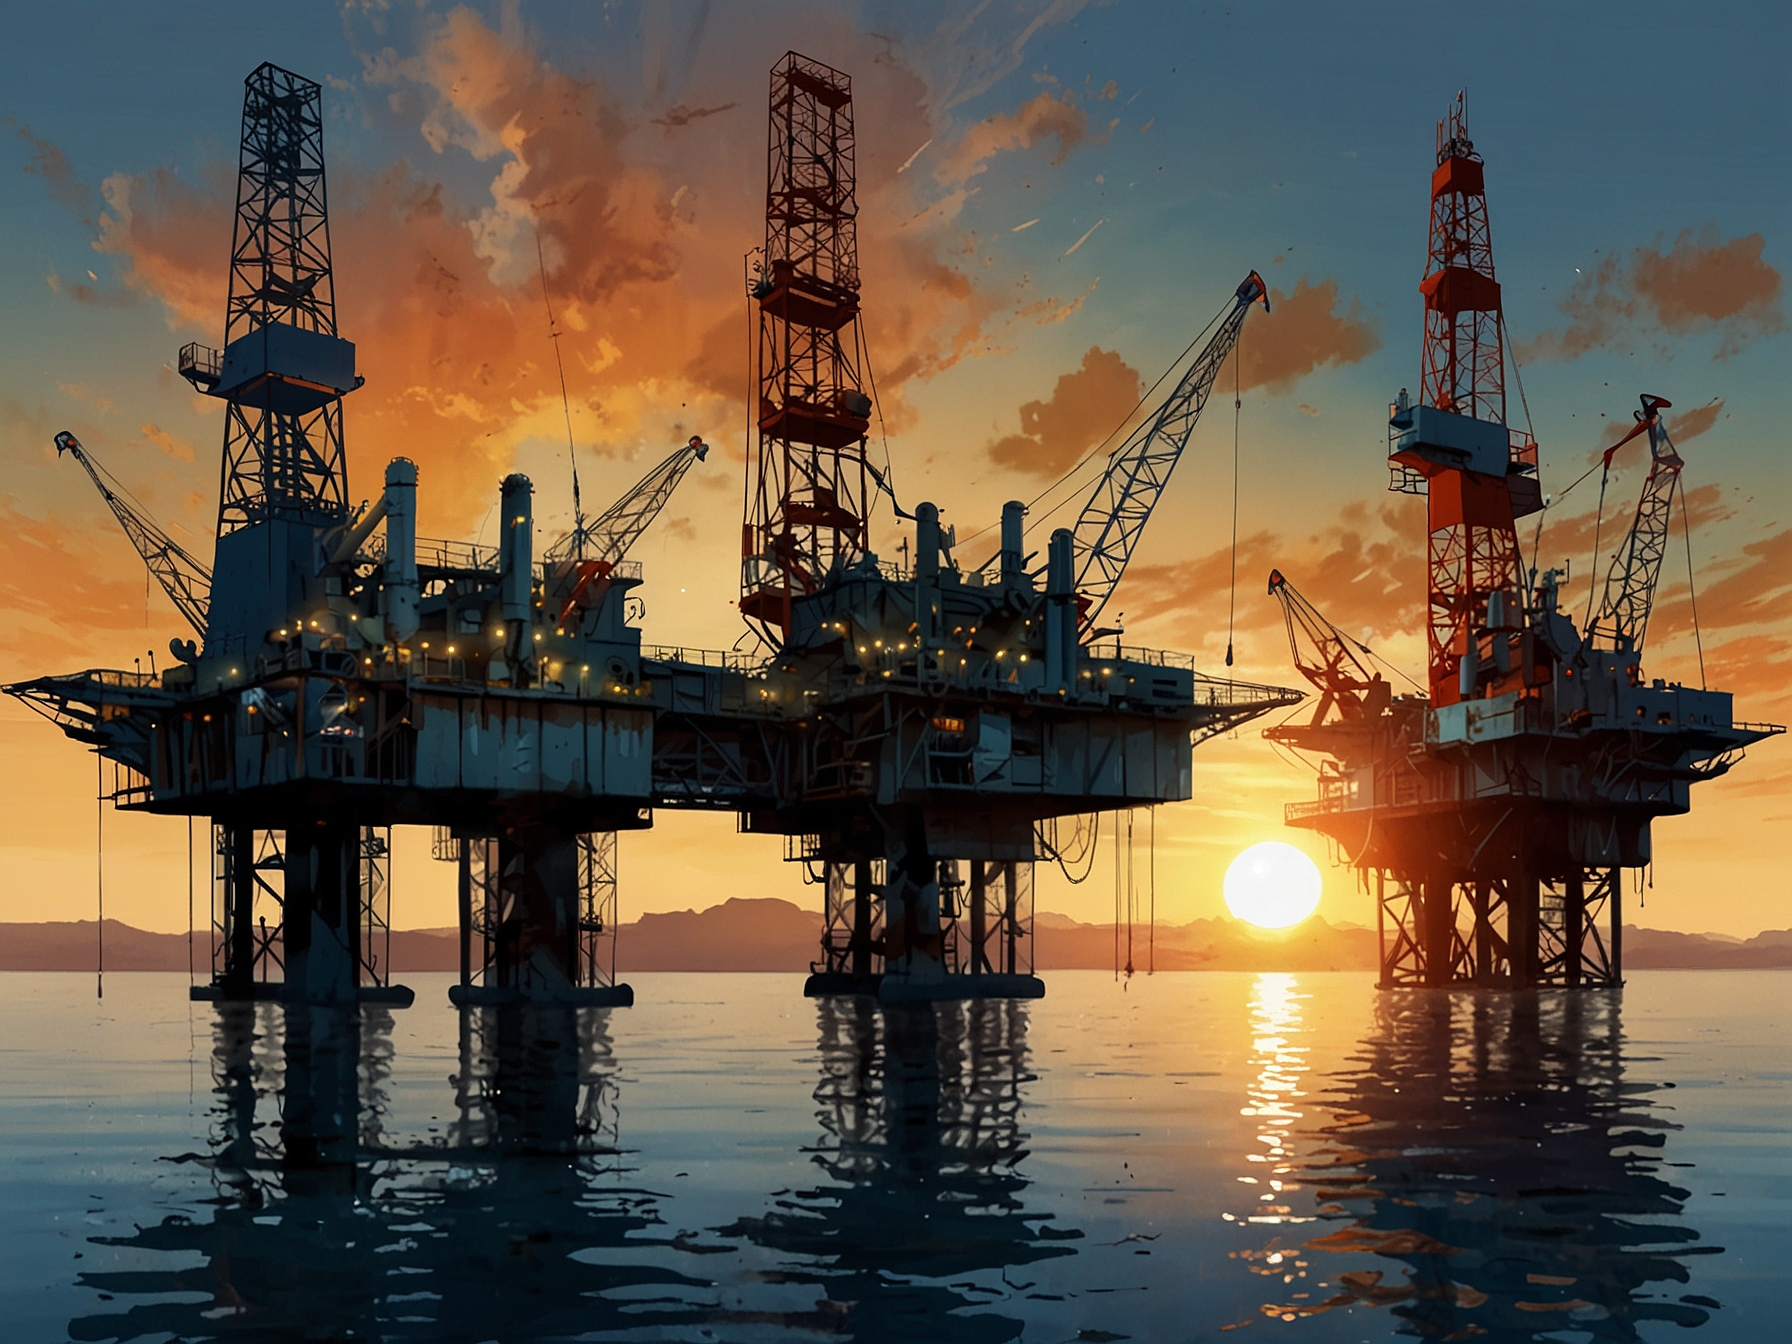 A conceptual image showing oil rigs and energy sector elements, symbolizing ONGC's operations and the global factors influencing its stock performance.